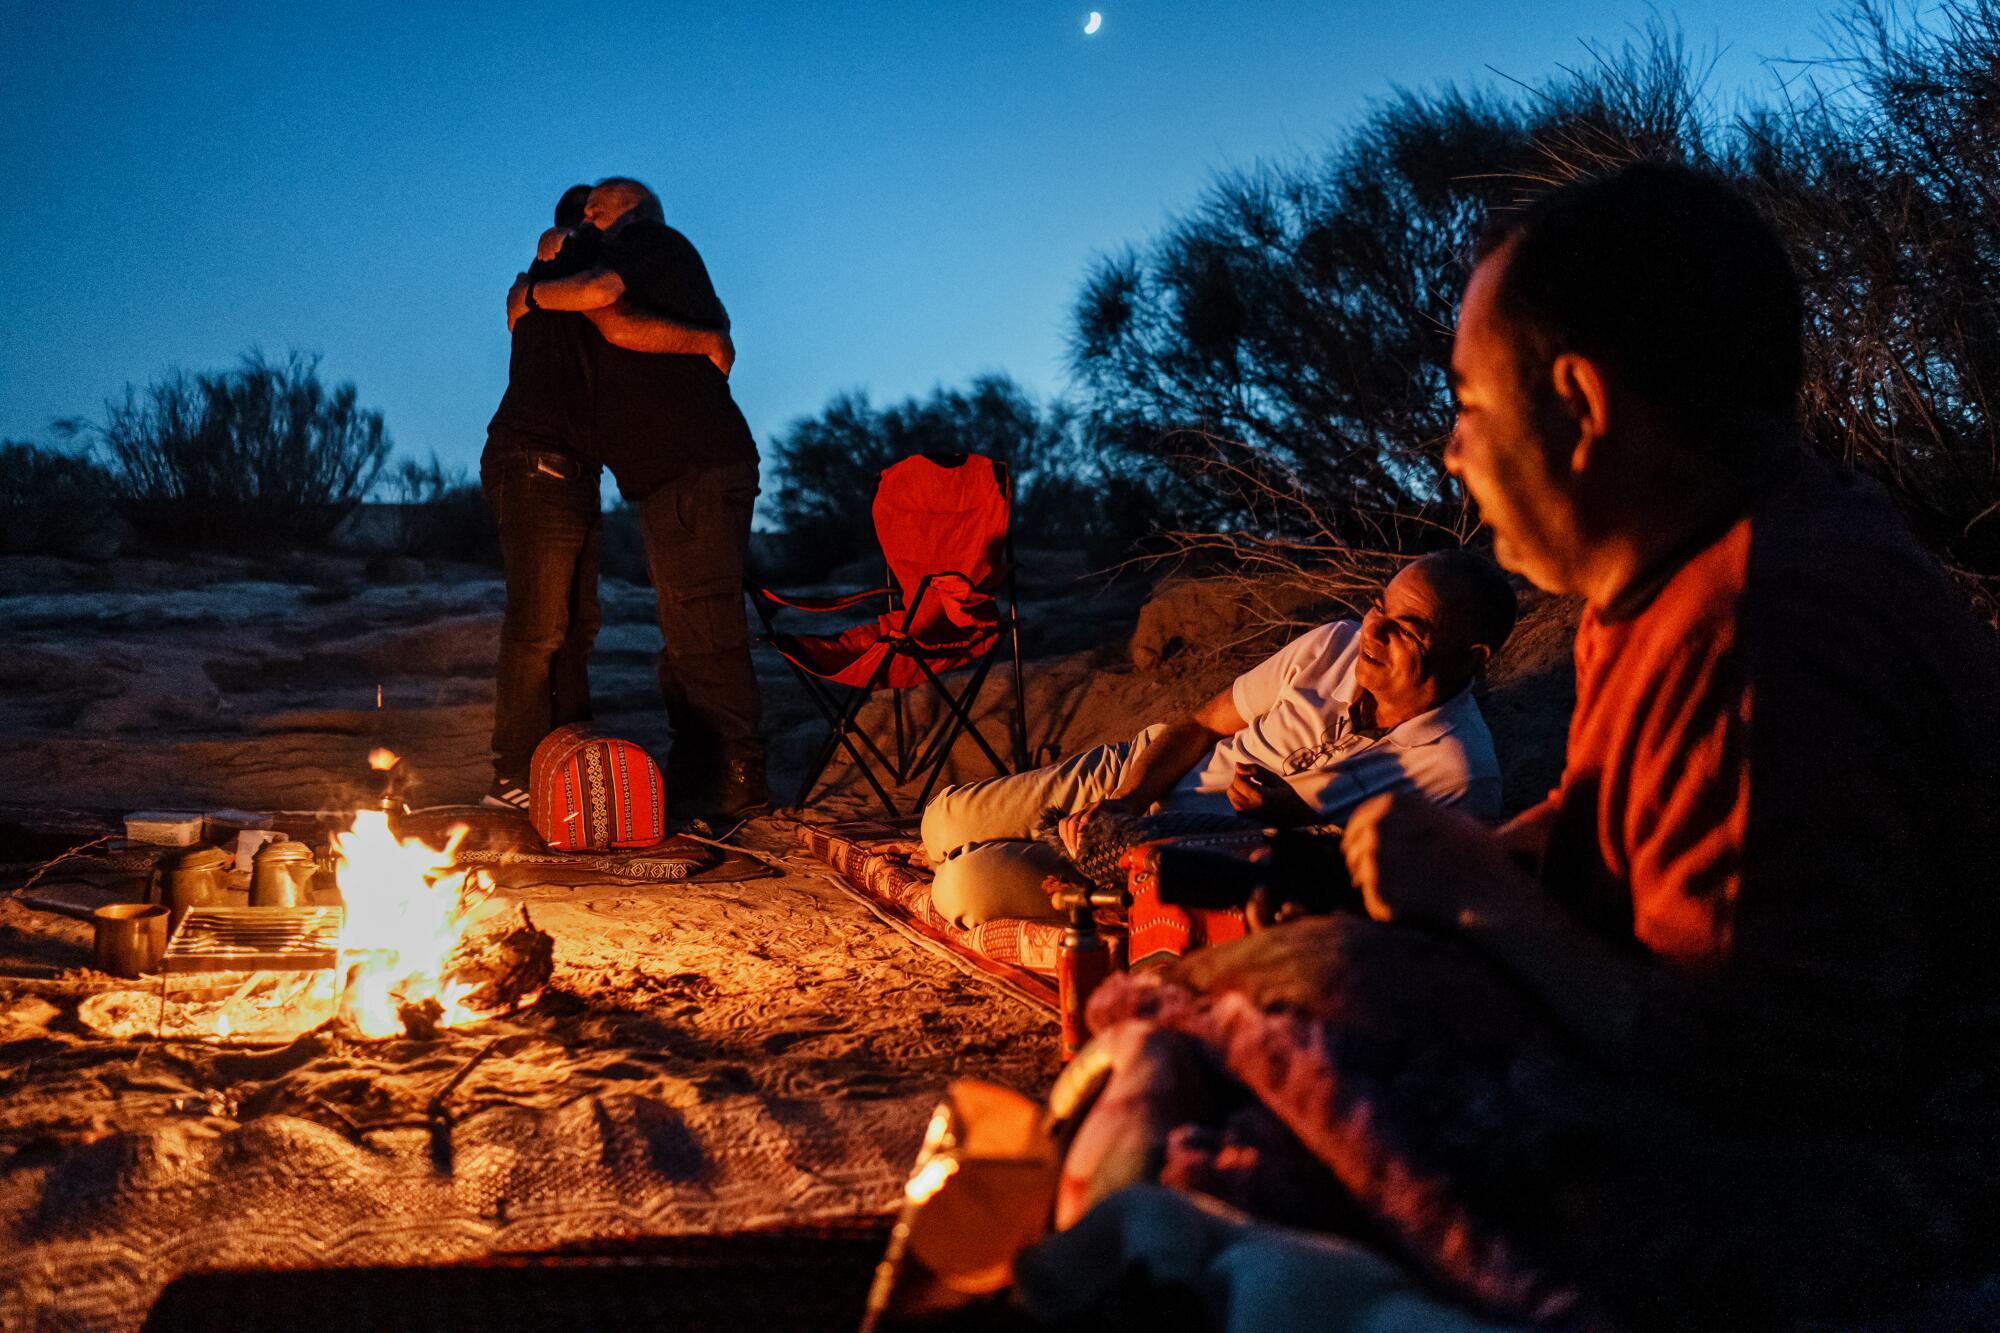 Two people embrace each near a campfire in the desert as others look on.